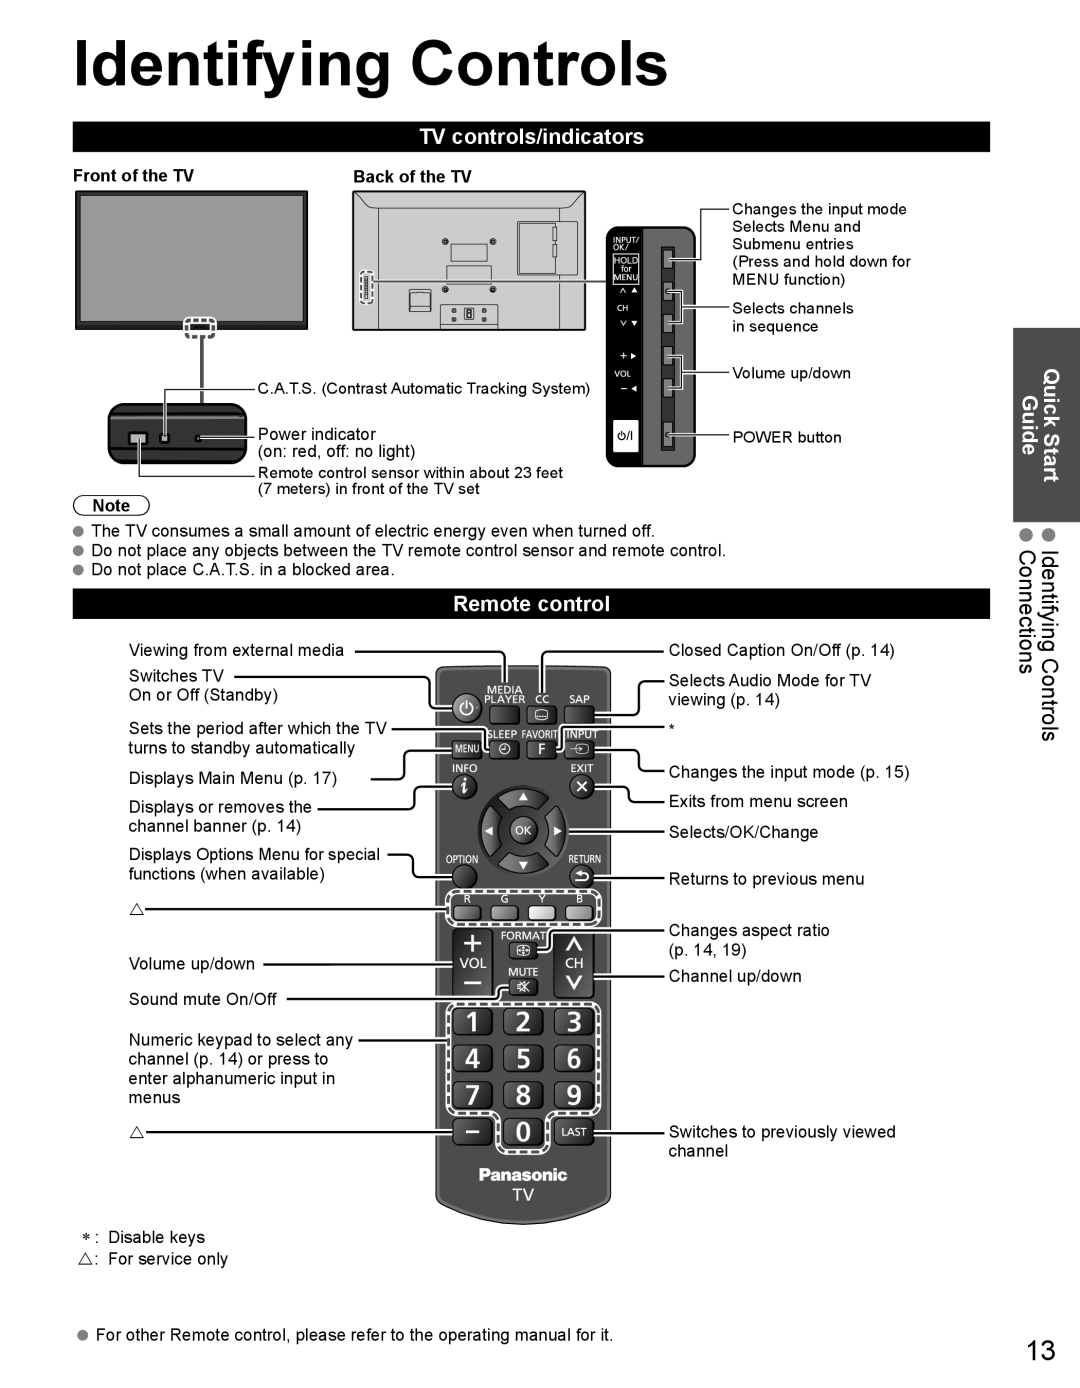 Panasonic TH32LRU60 warranty Identifying Controls Connections, TV controls/indicators, Remote control, Front of the TV 